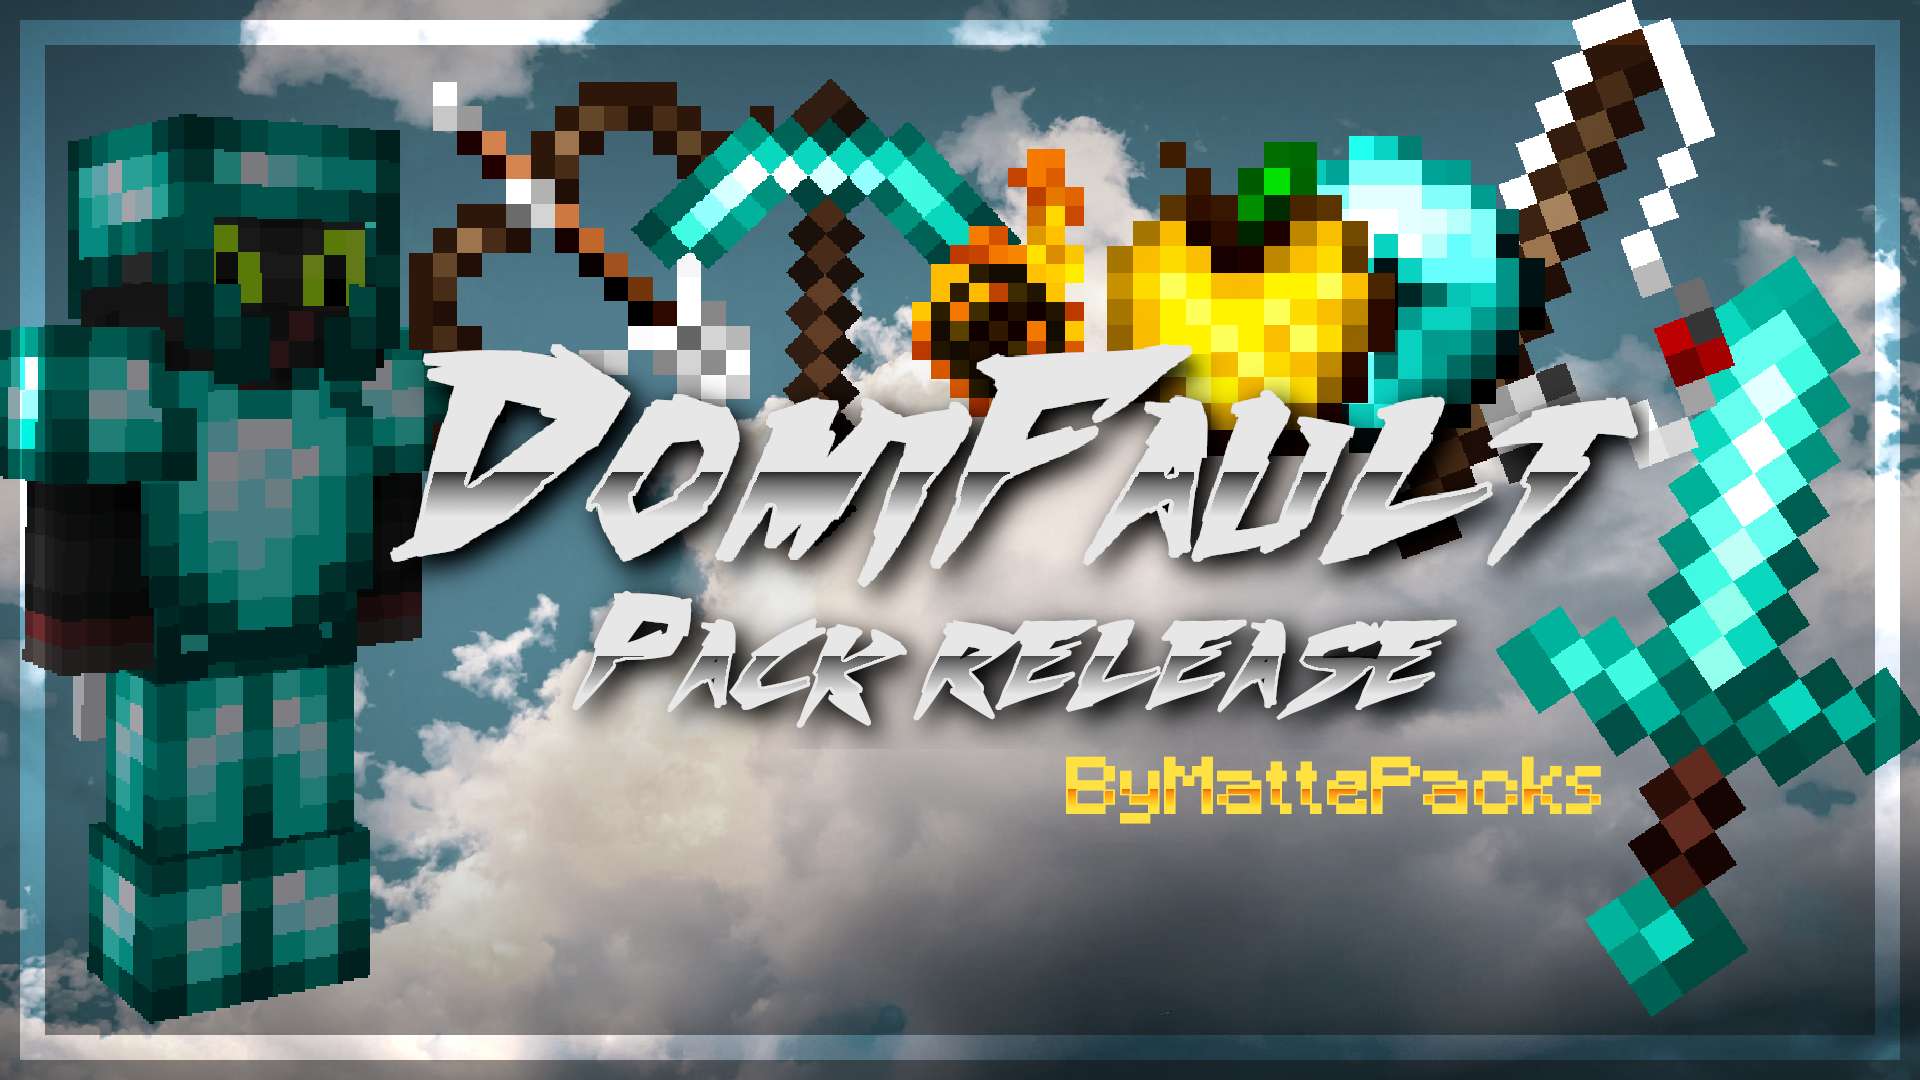 Domifault  16 by MattePacks on PvPRP